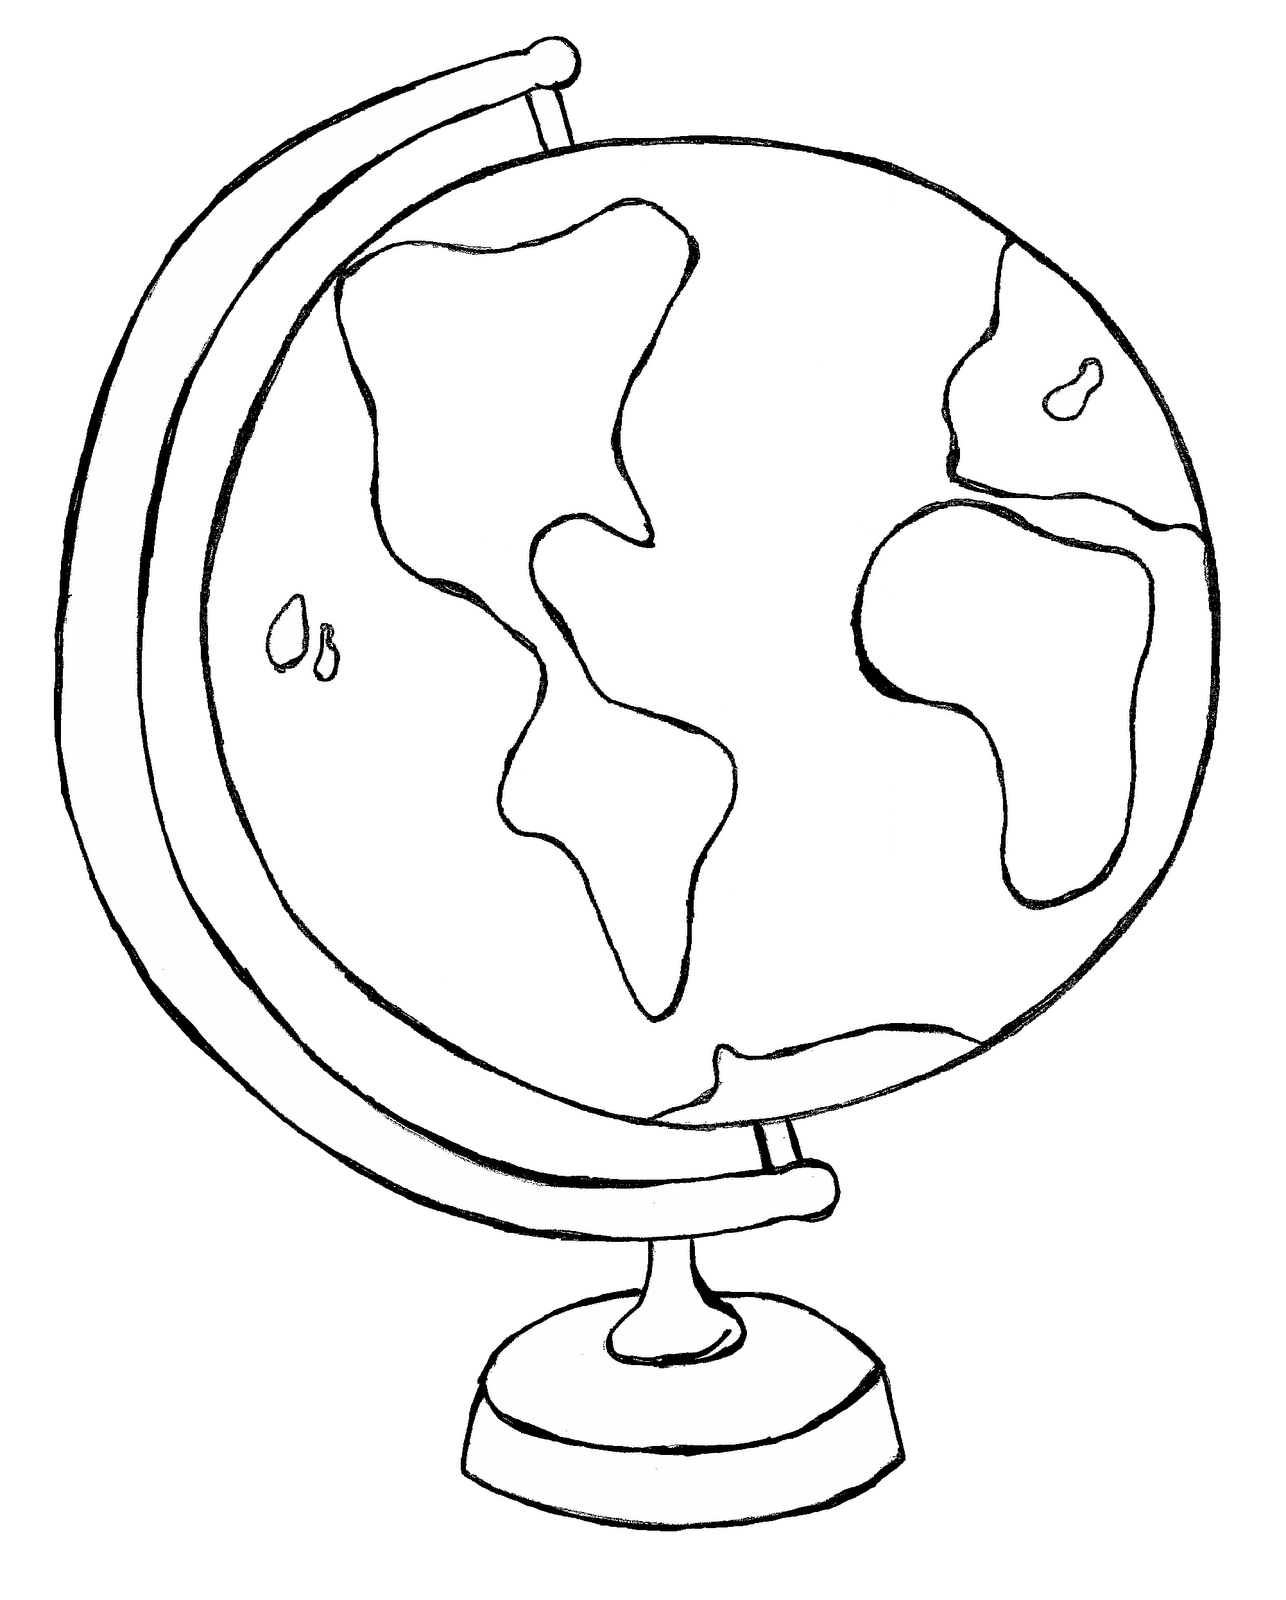 World  black and white globe clipart black and white free images 3